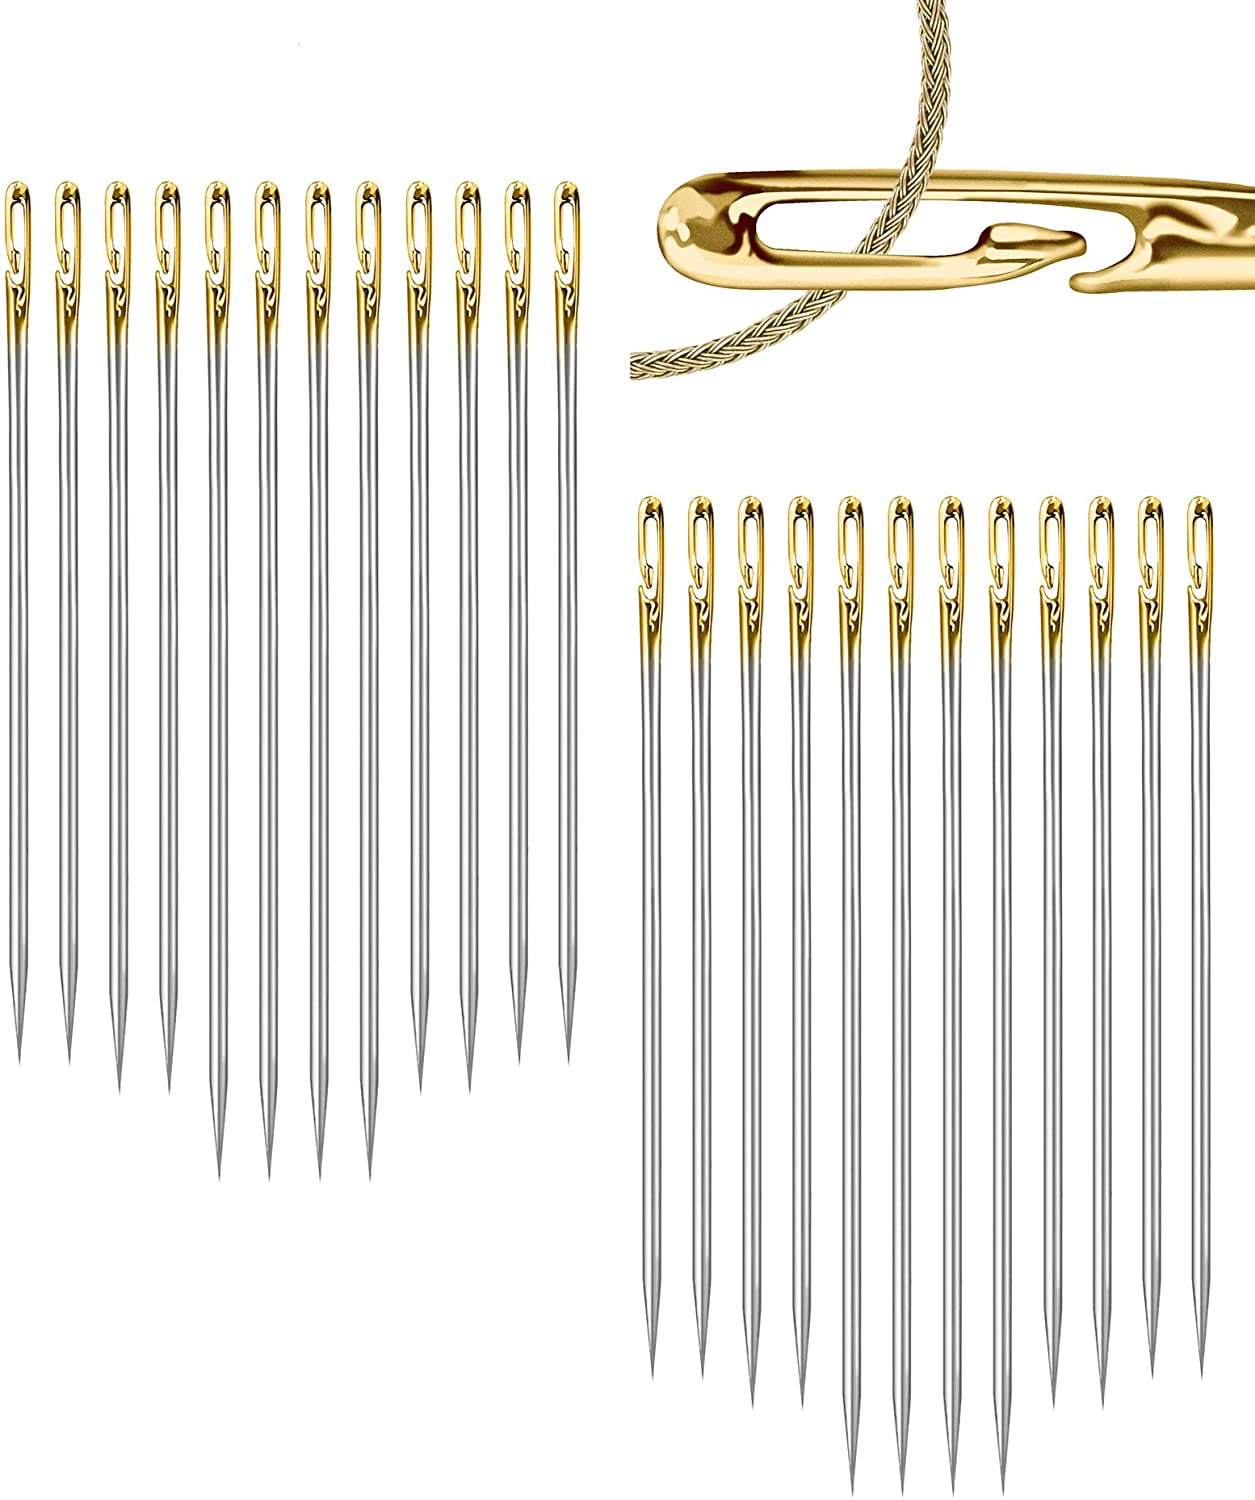  Sewmaster Needle-Side Hole Hand Sewing Tools, Needles for Hand  Sewing, Self Threading Needles for Hand Sewing, Easy Thread Needles, Hand  Embroidery Needles for Quilting (A+C)